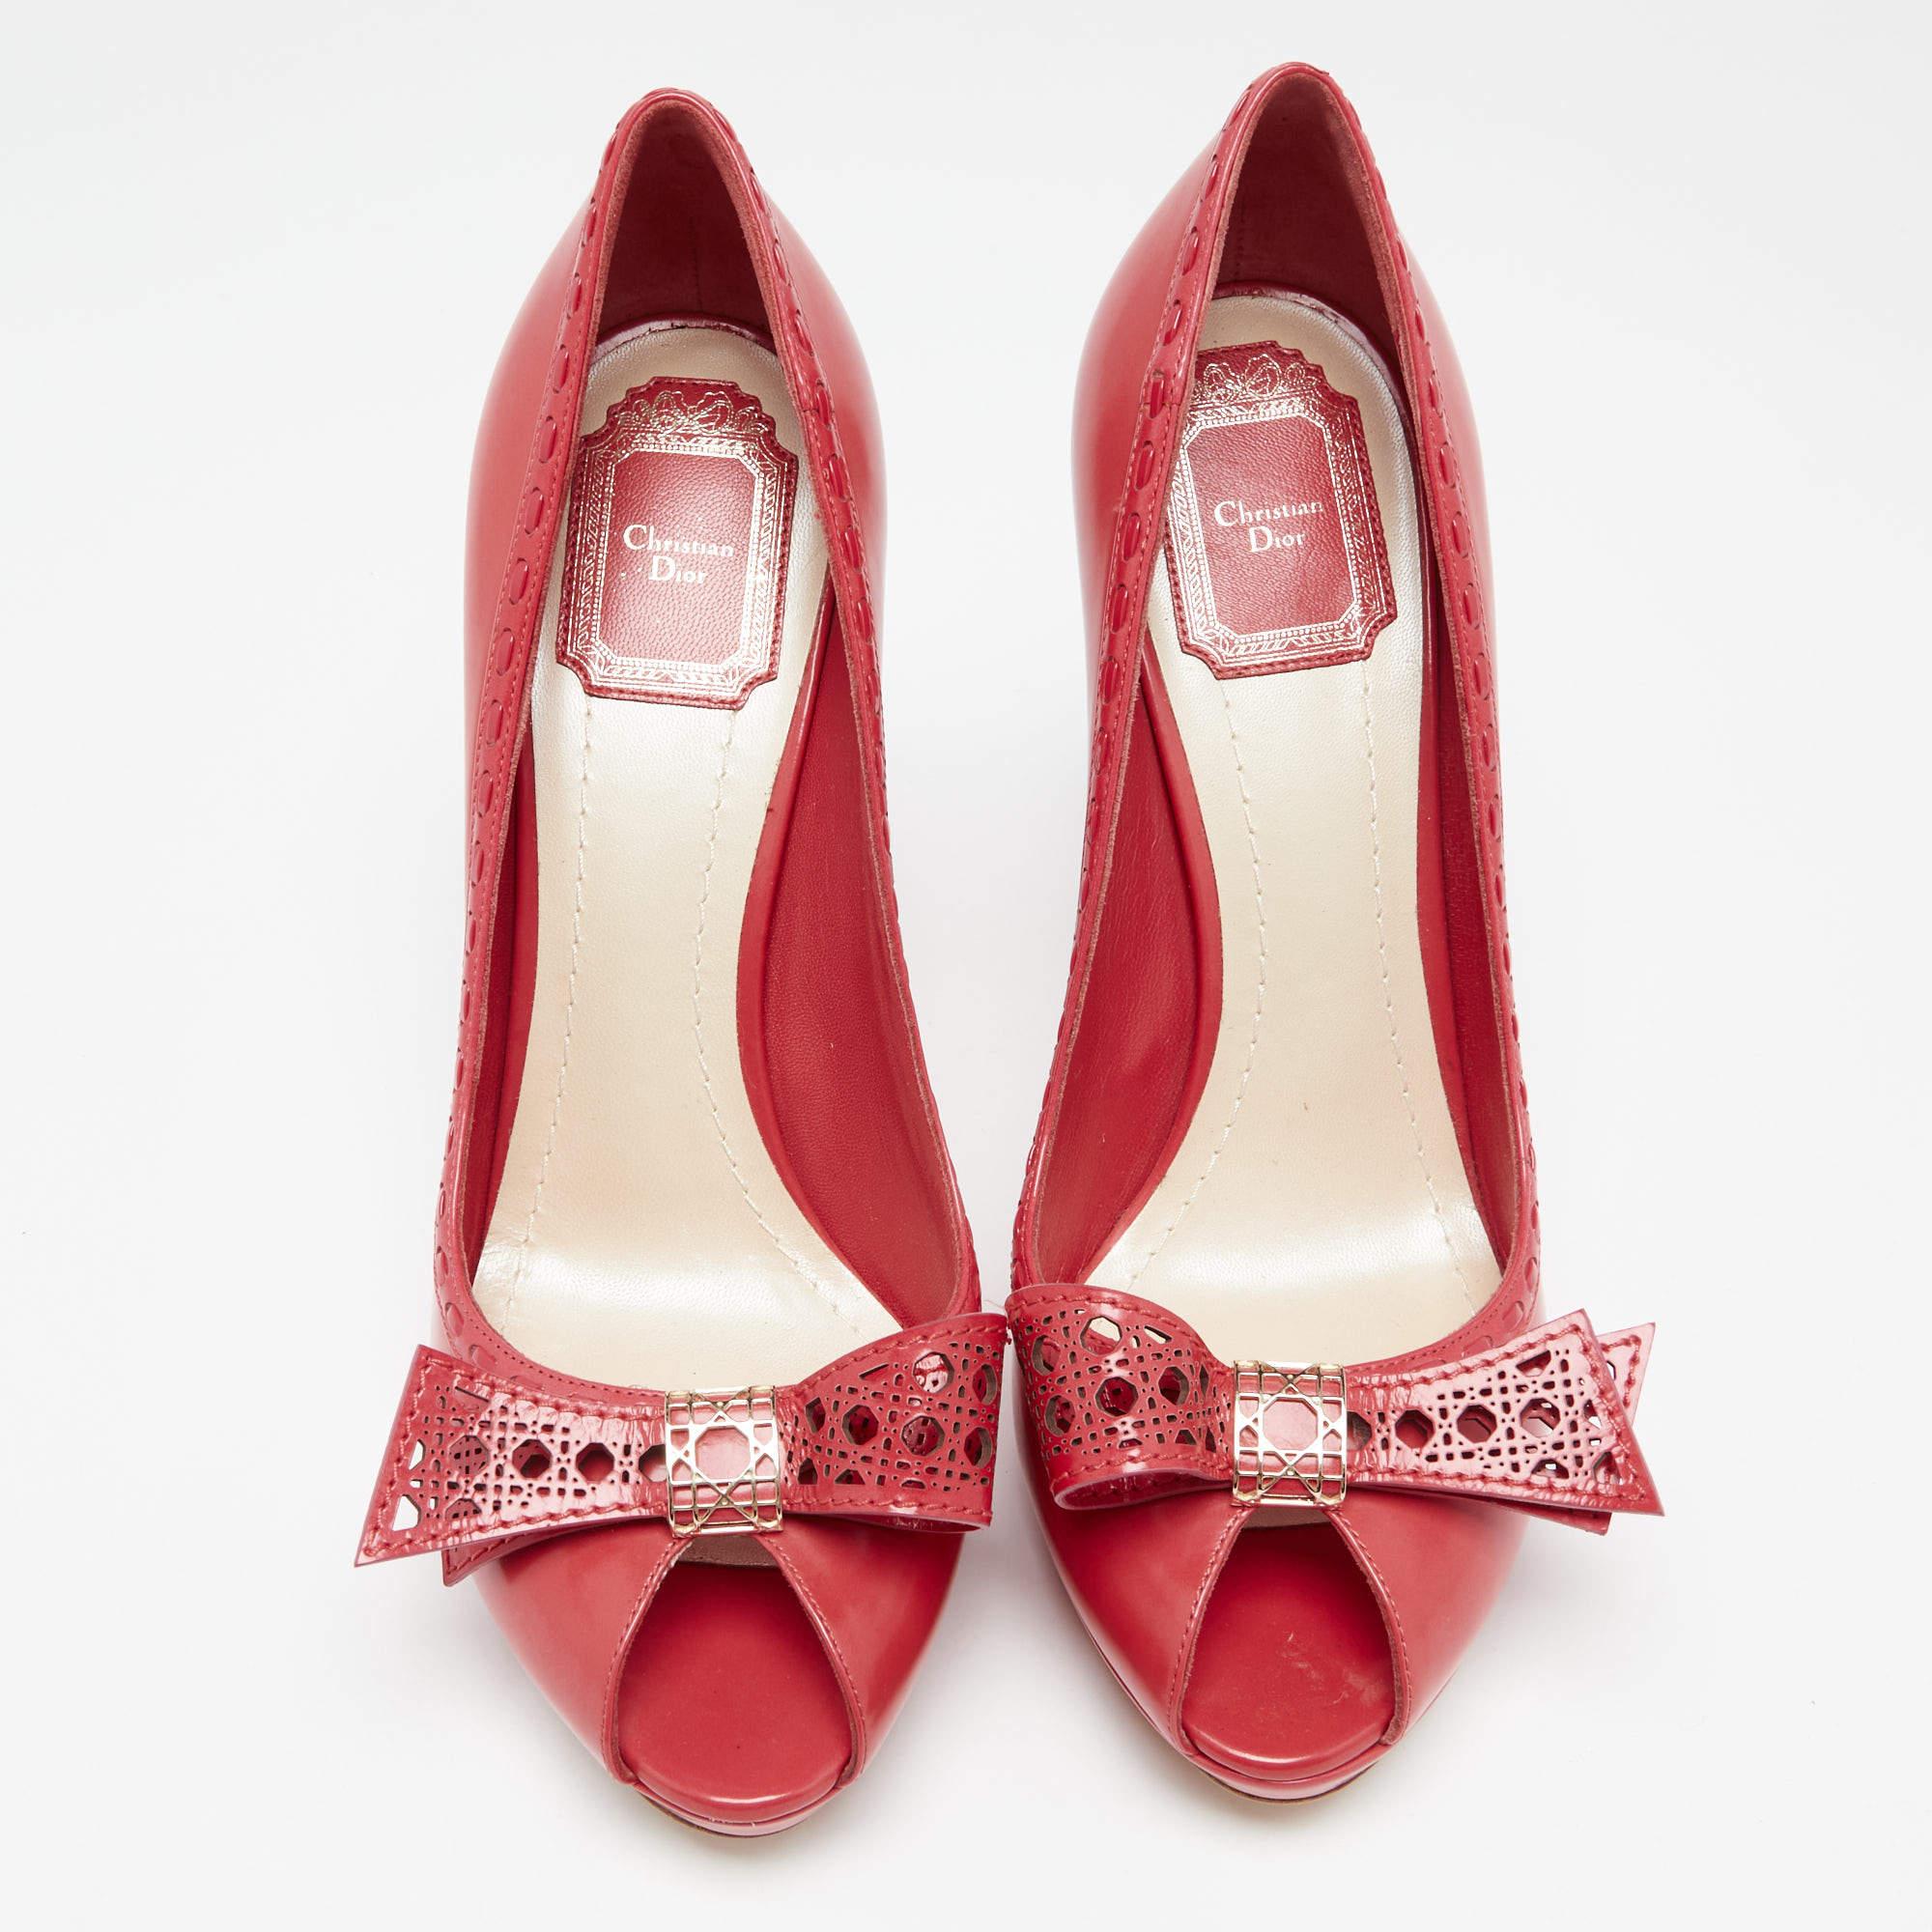 Dior designs ensure to grant you fashion excellence, and these pumps are no different! They are constructed with leather featuring Cannage details and bows on the vamps. These ravishing red pumps are set on stiletto heels and have peep-toes. Team